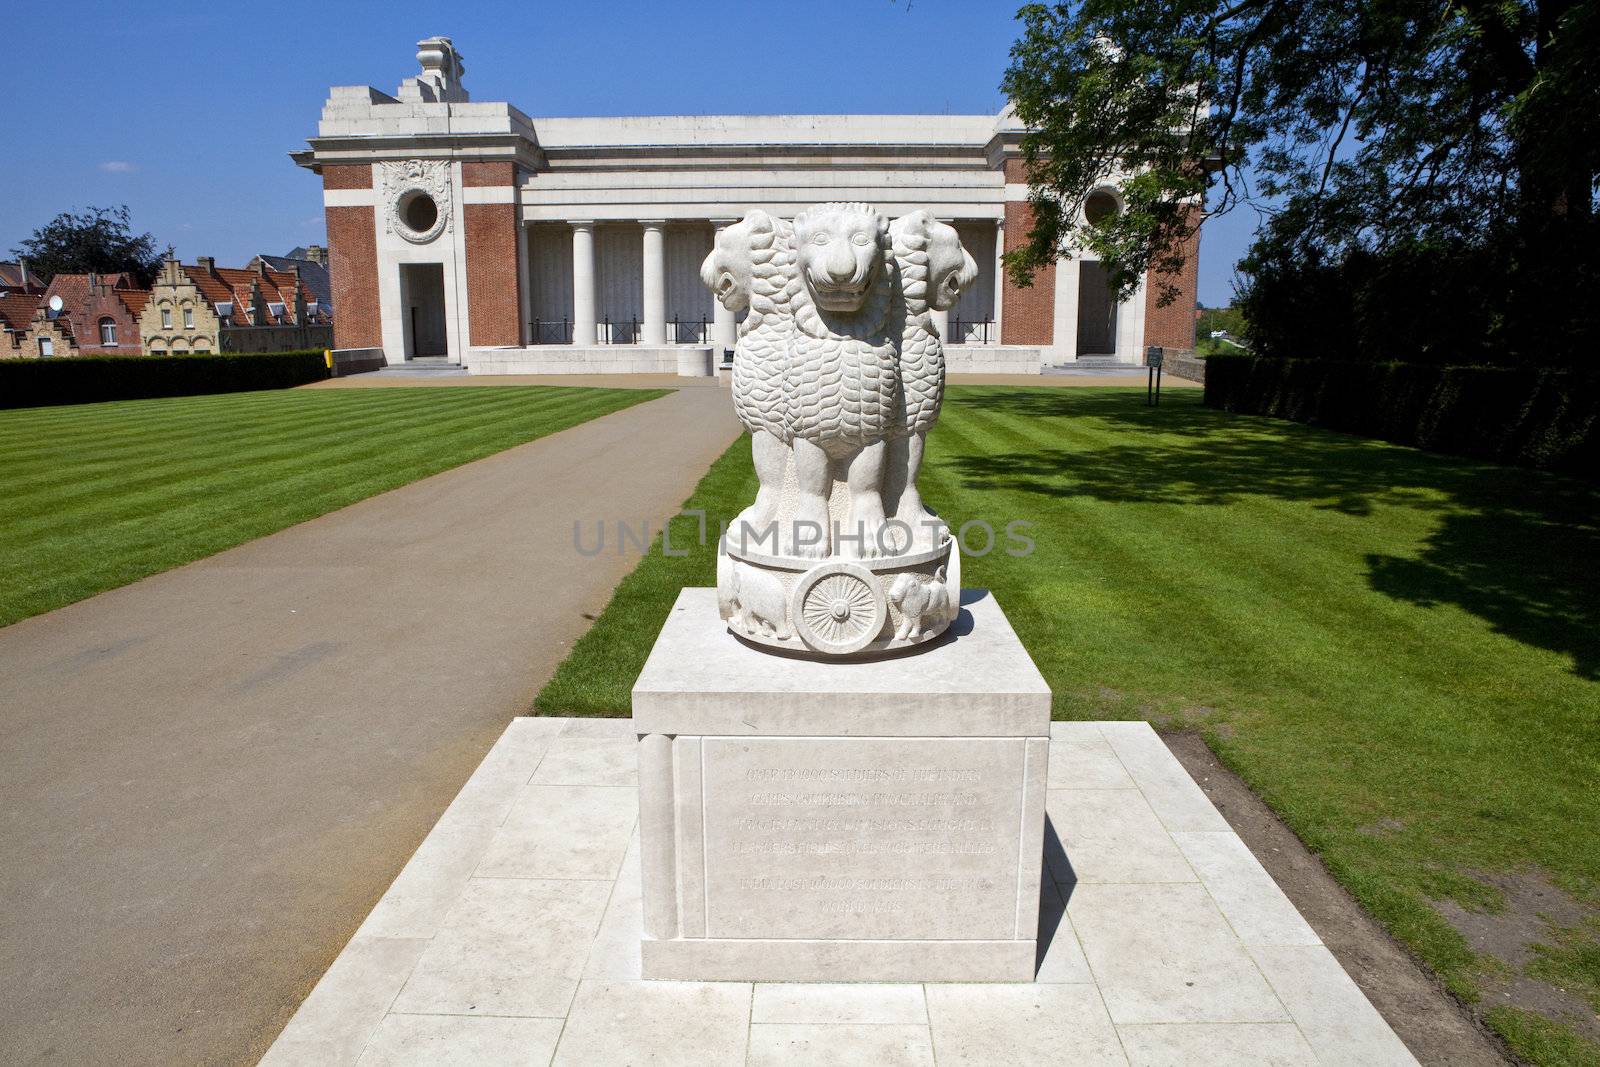 A monument/memorial dedicated to the Indian servicemen who fought in Flanders fields during the first world war.  Behind the monument is the Menin Gate.